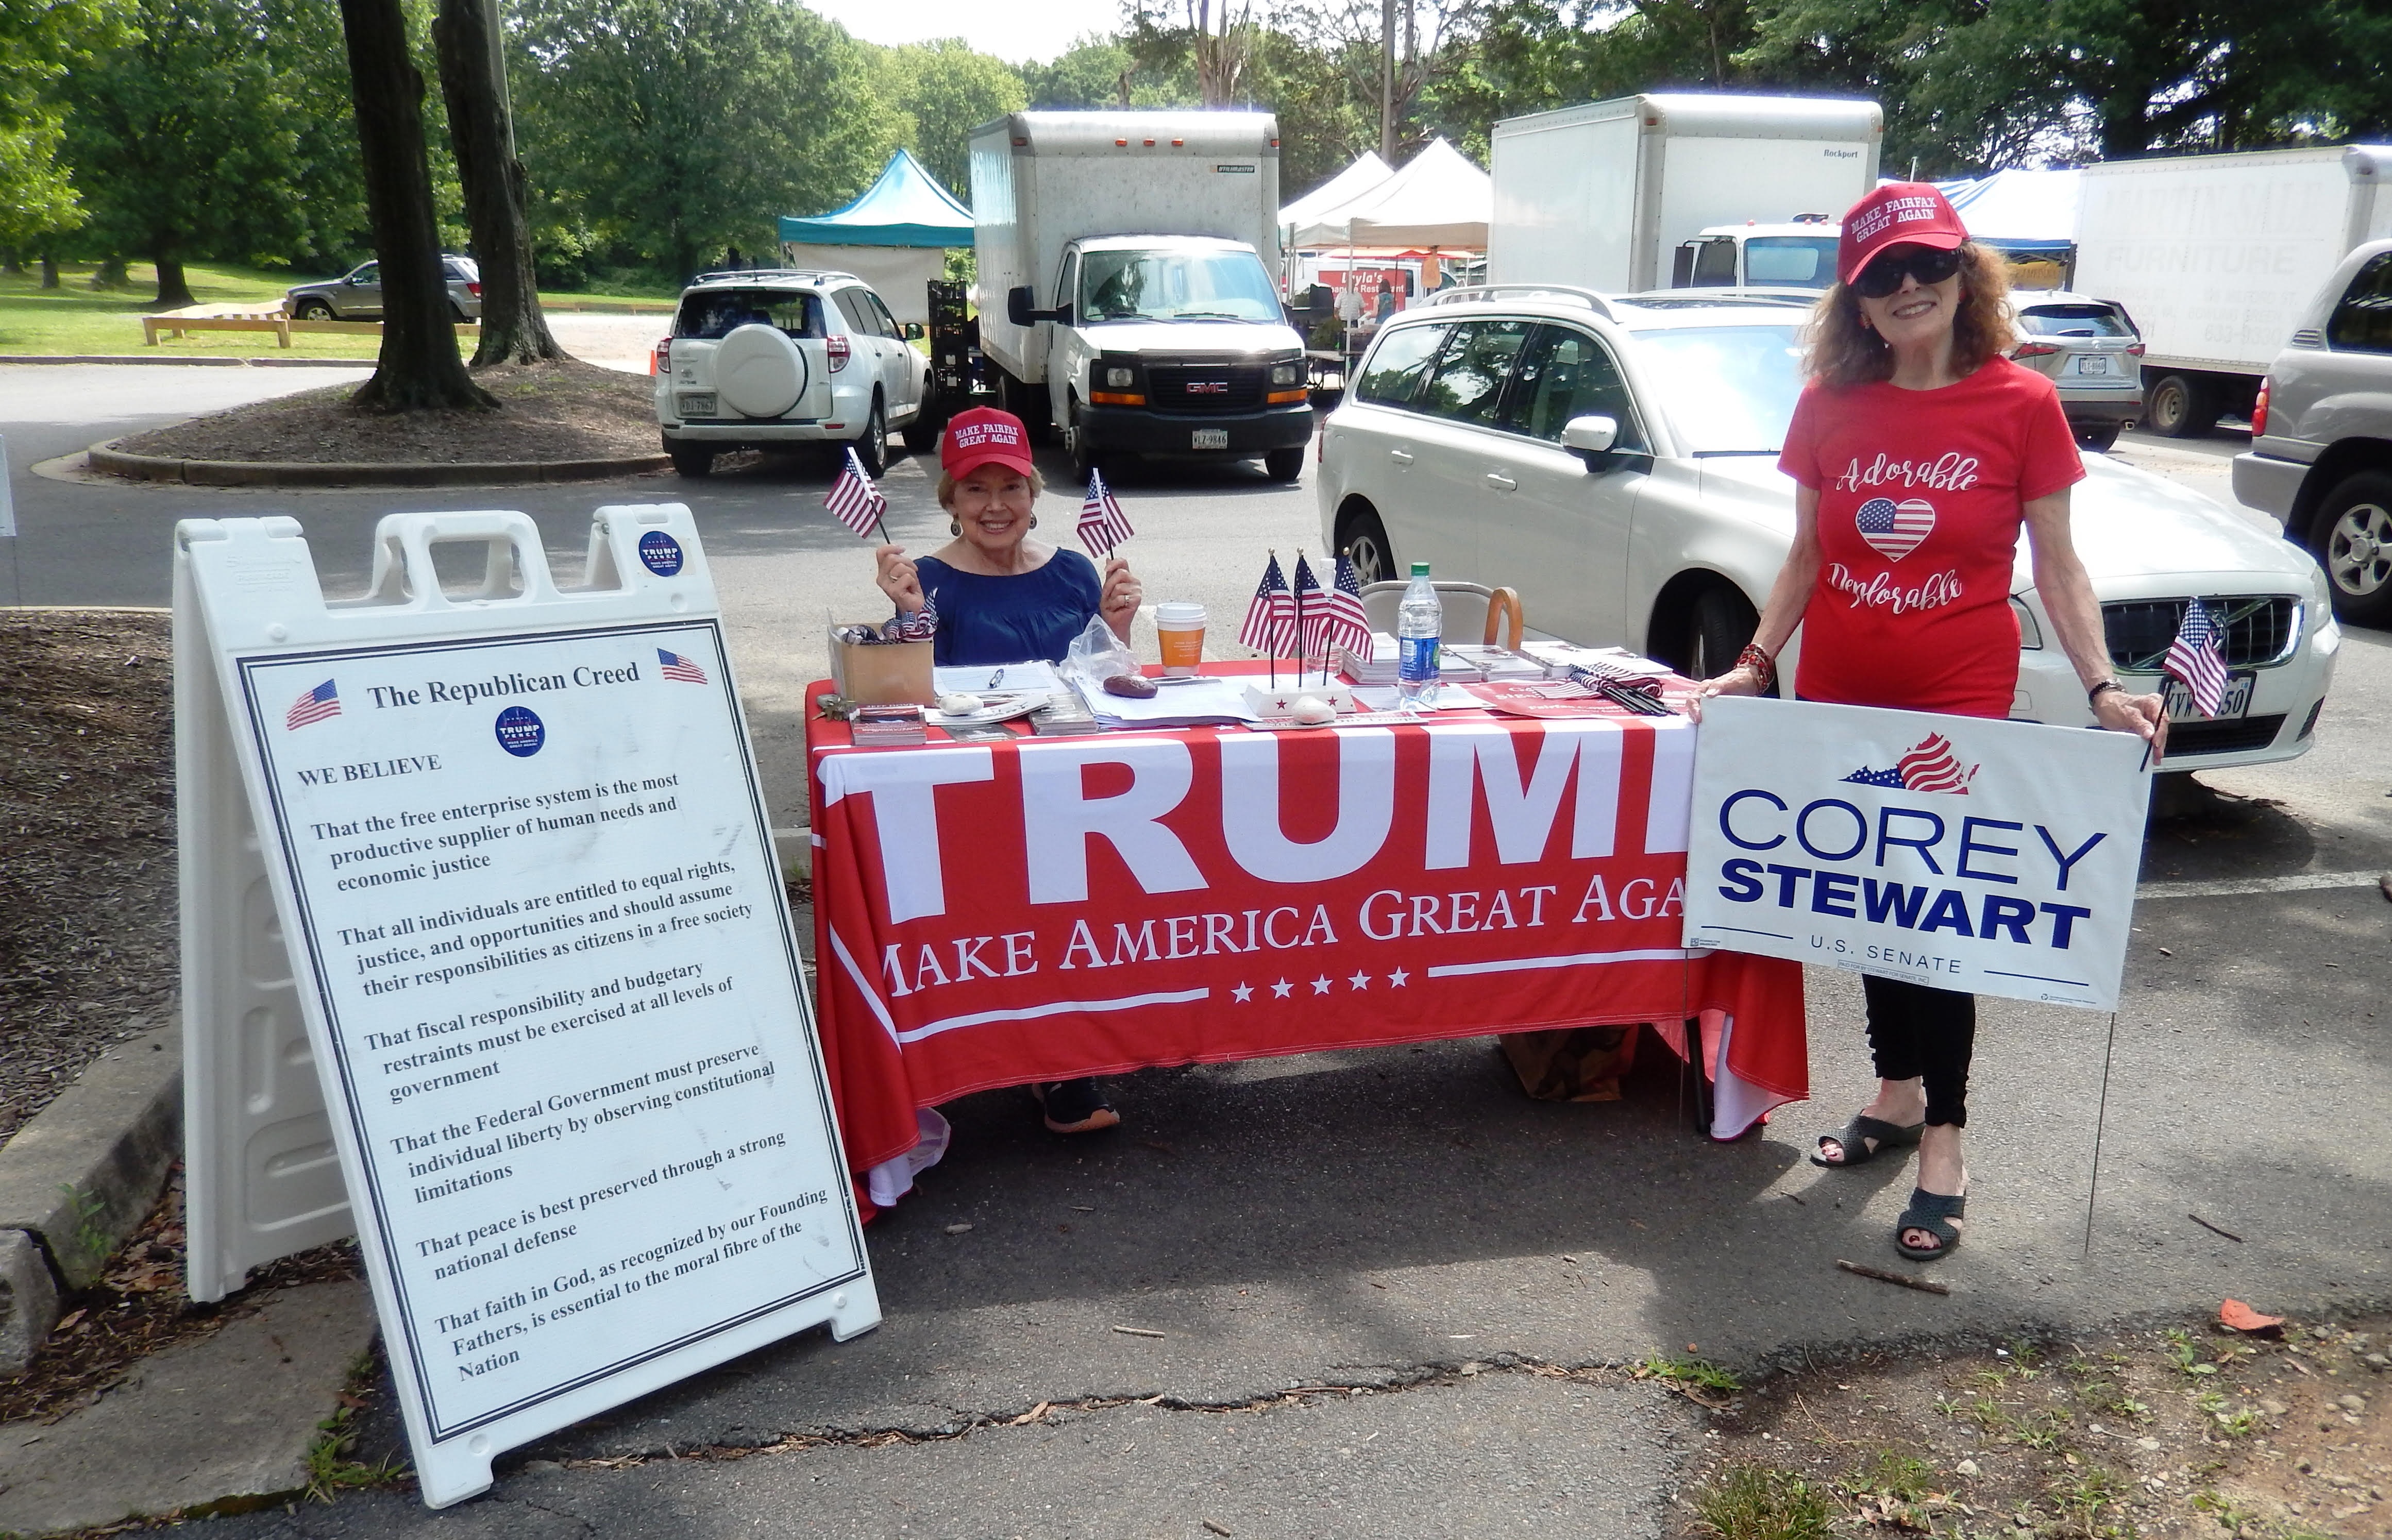 Farmers Market – Waving Flags for Corey Stewart on First Day of Summer